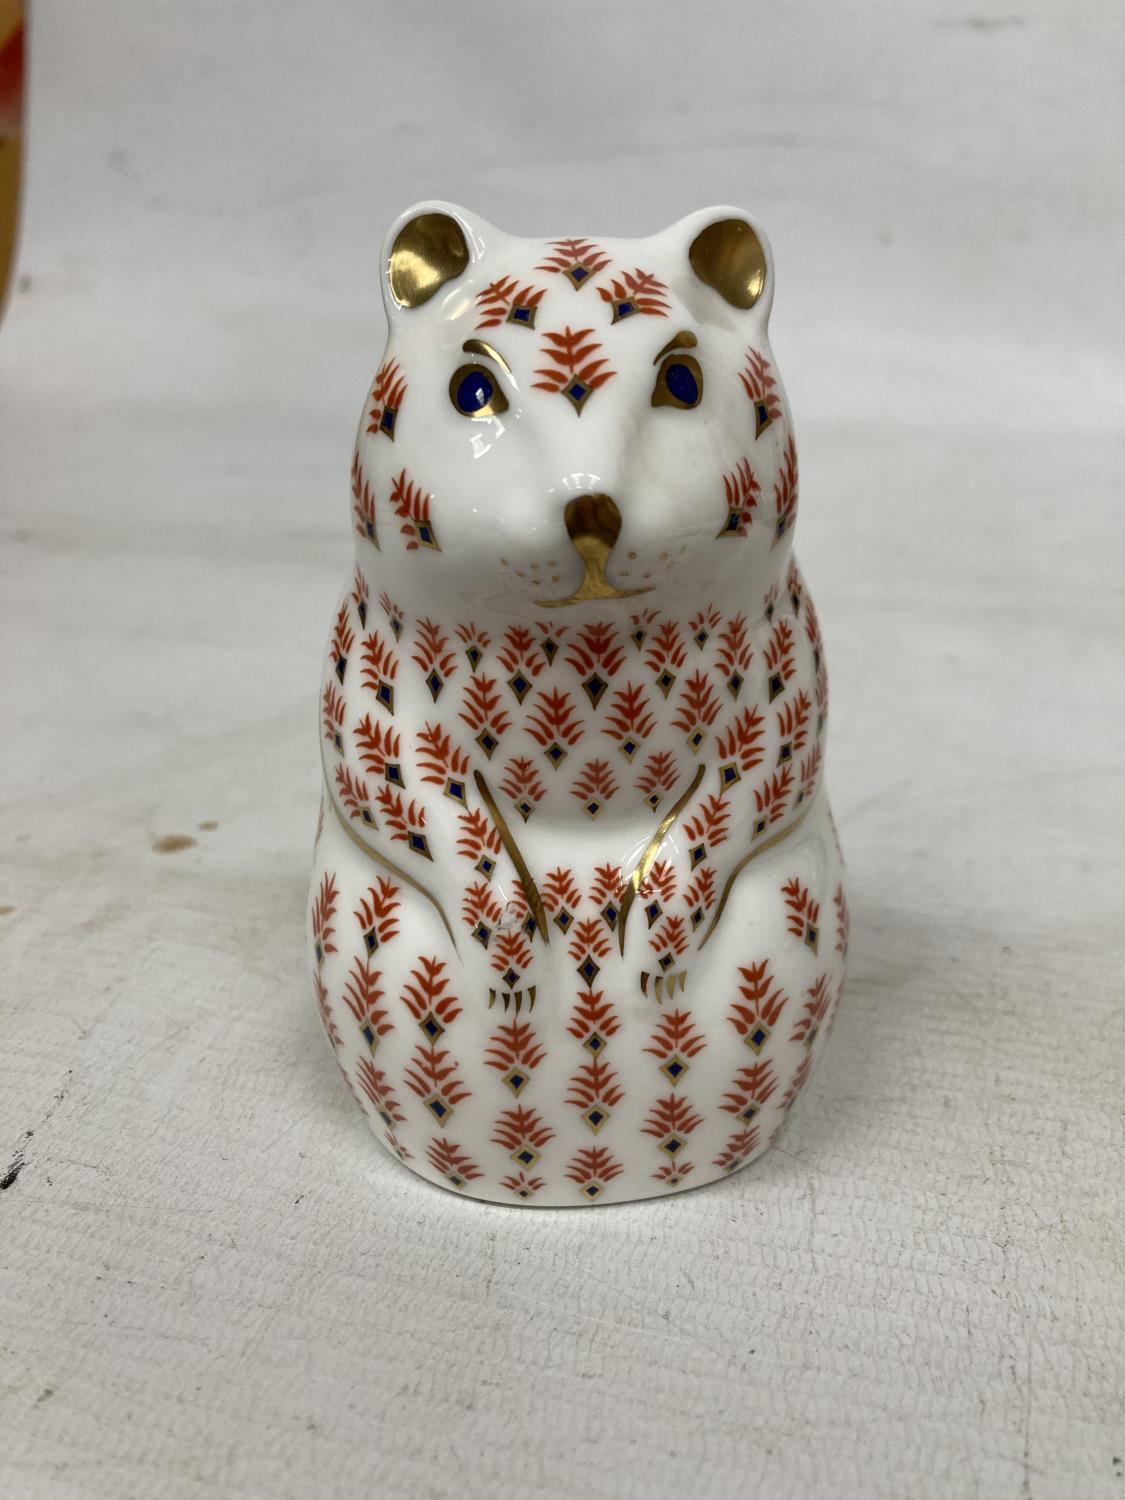 A ROYAL CROWN DERBY HAMSTER (FIRSTS)